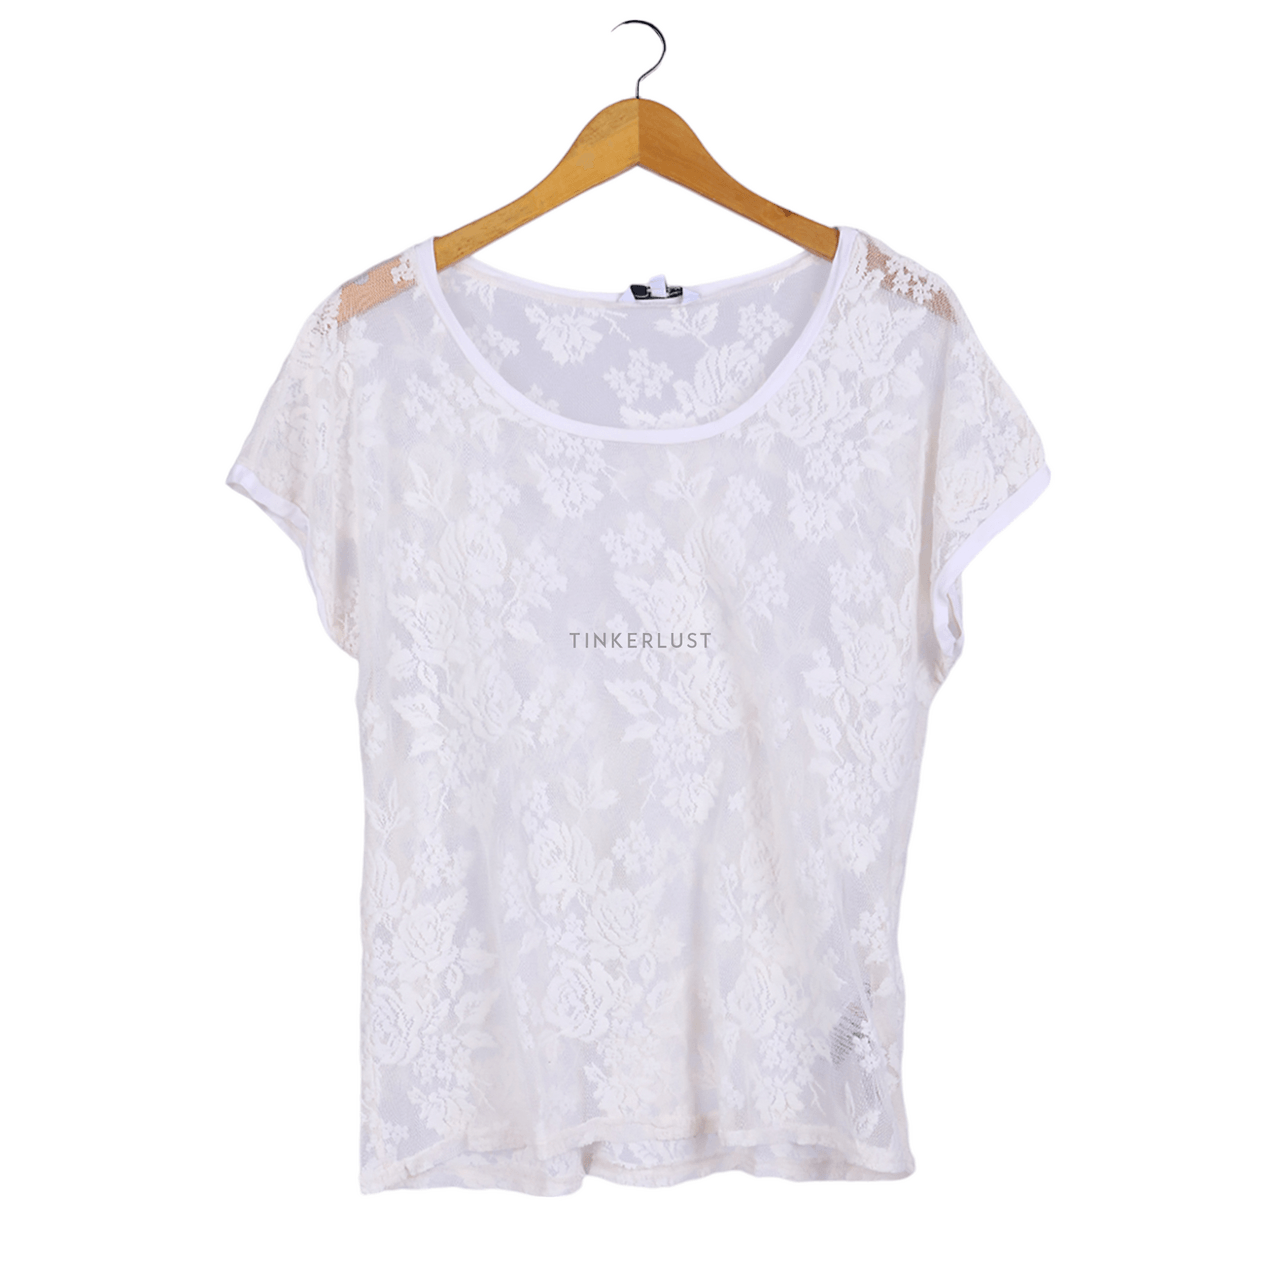 New Look White Lace Blouse